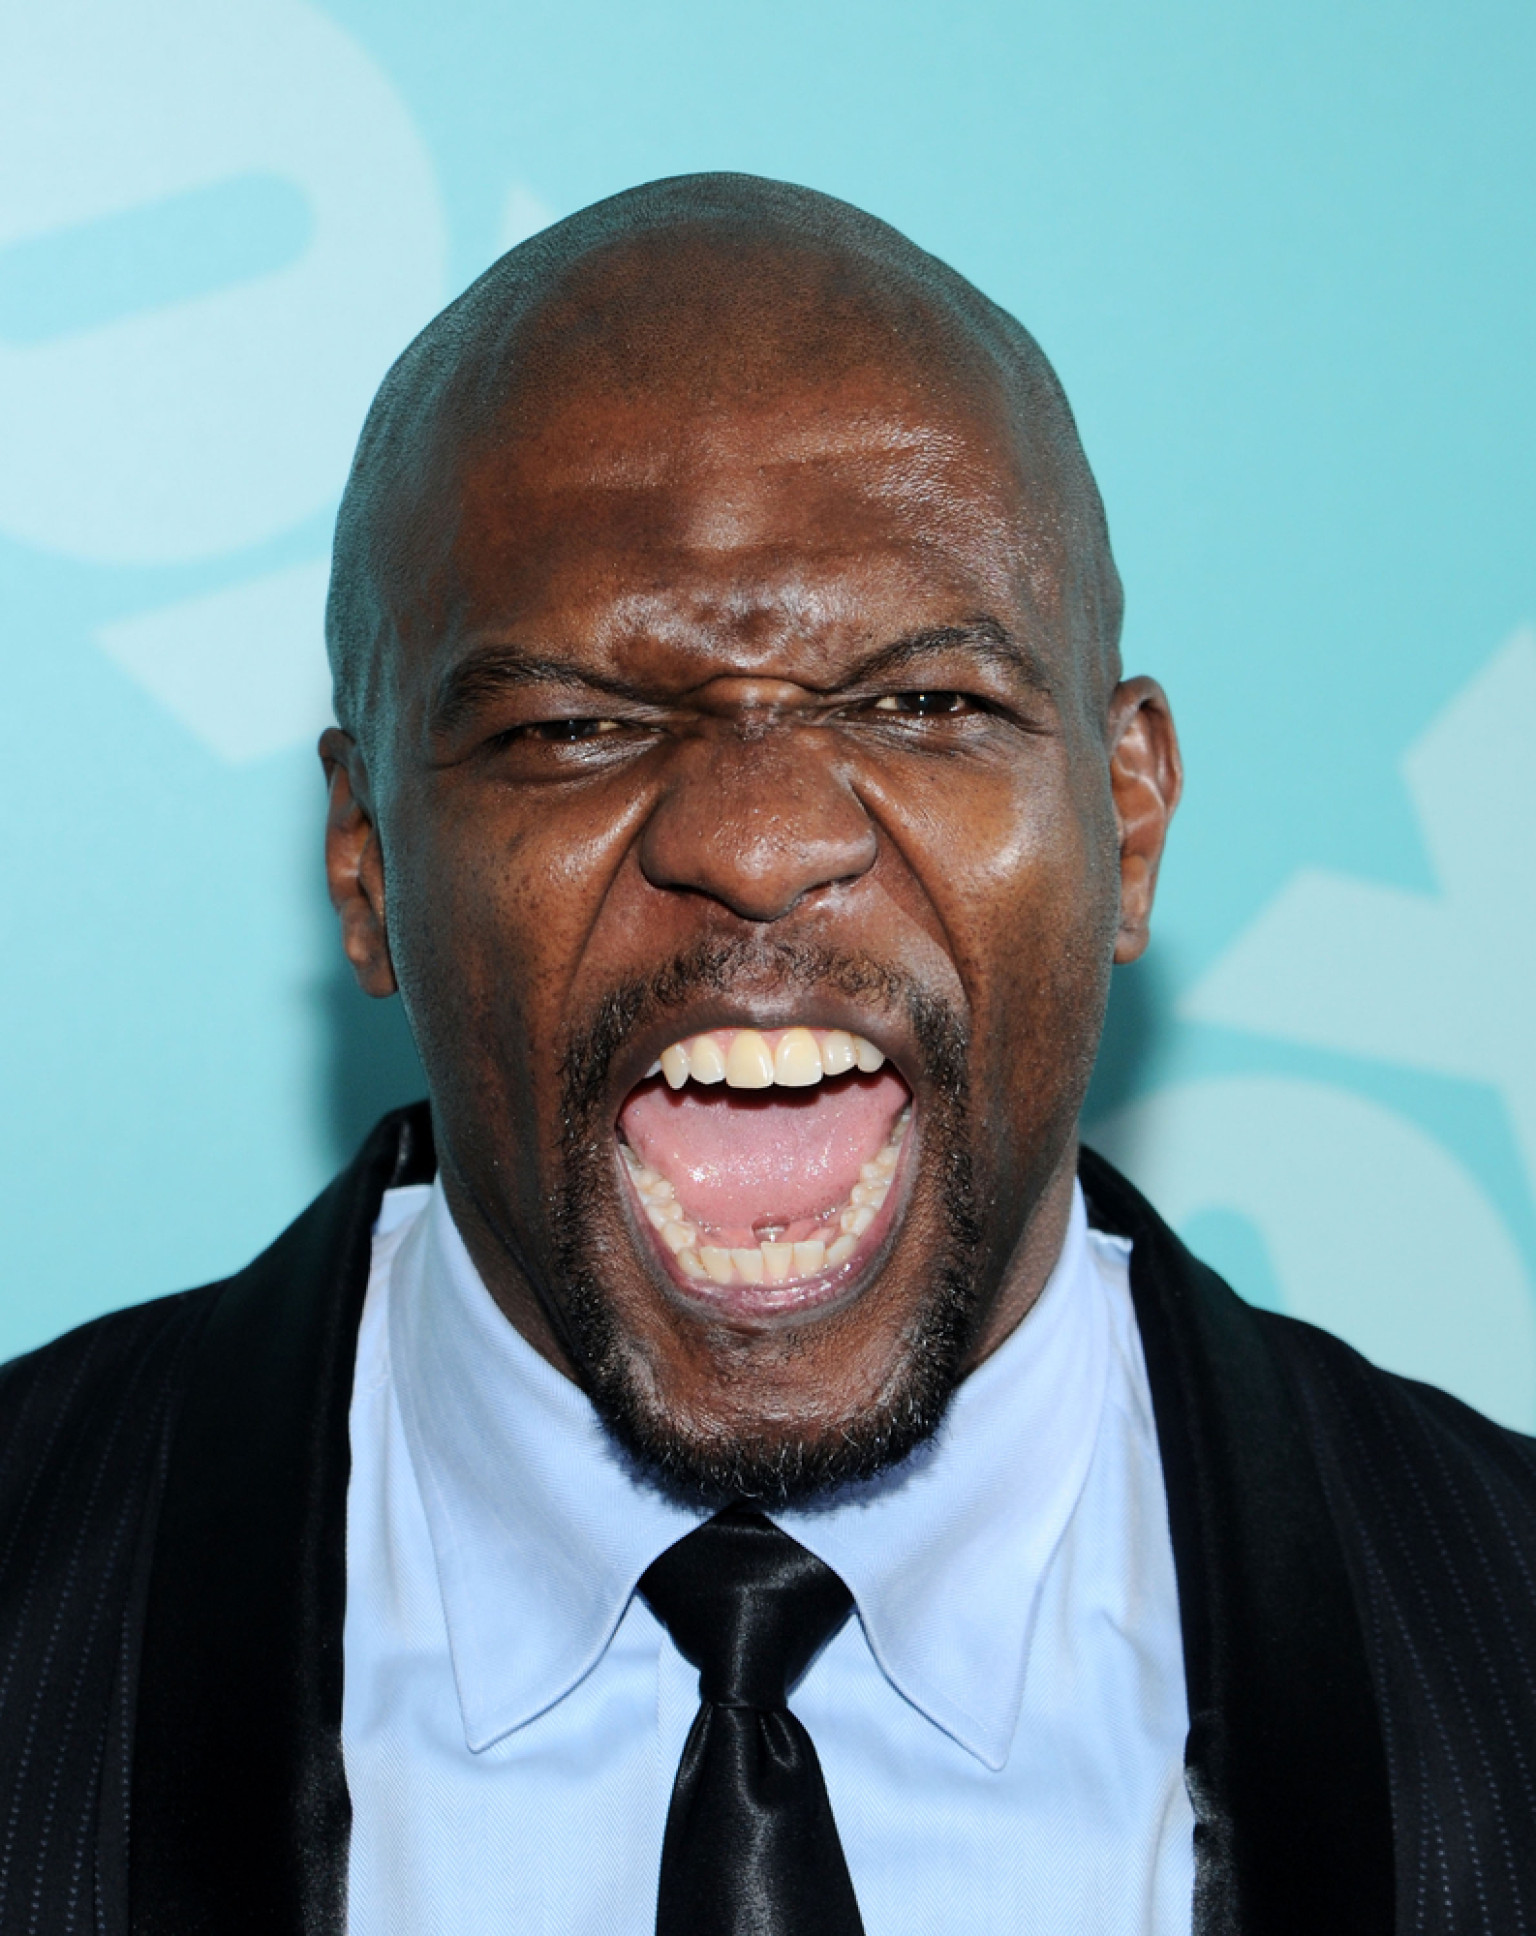 Terry Crews At Comic-Con: King Of The Nerds | HuffPost
